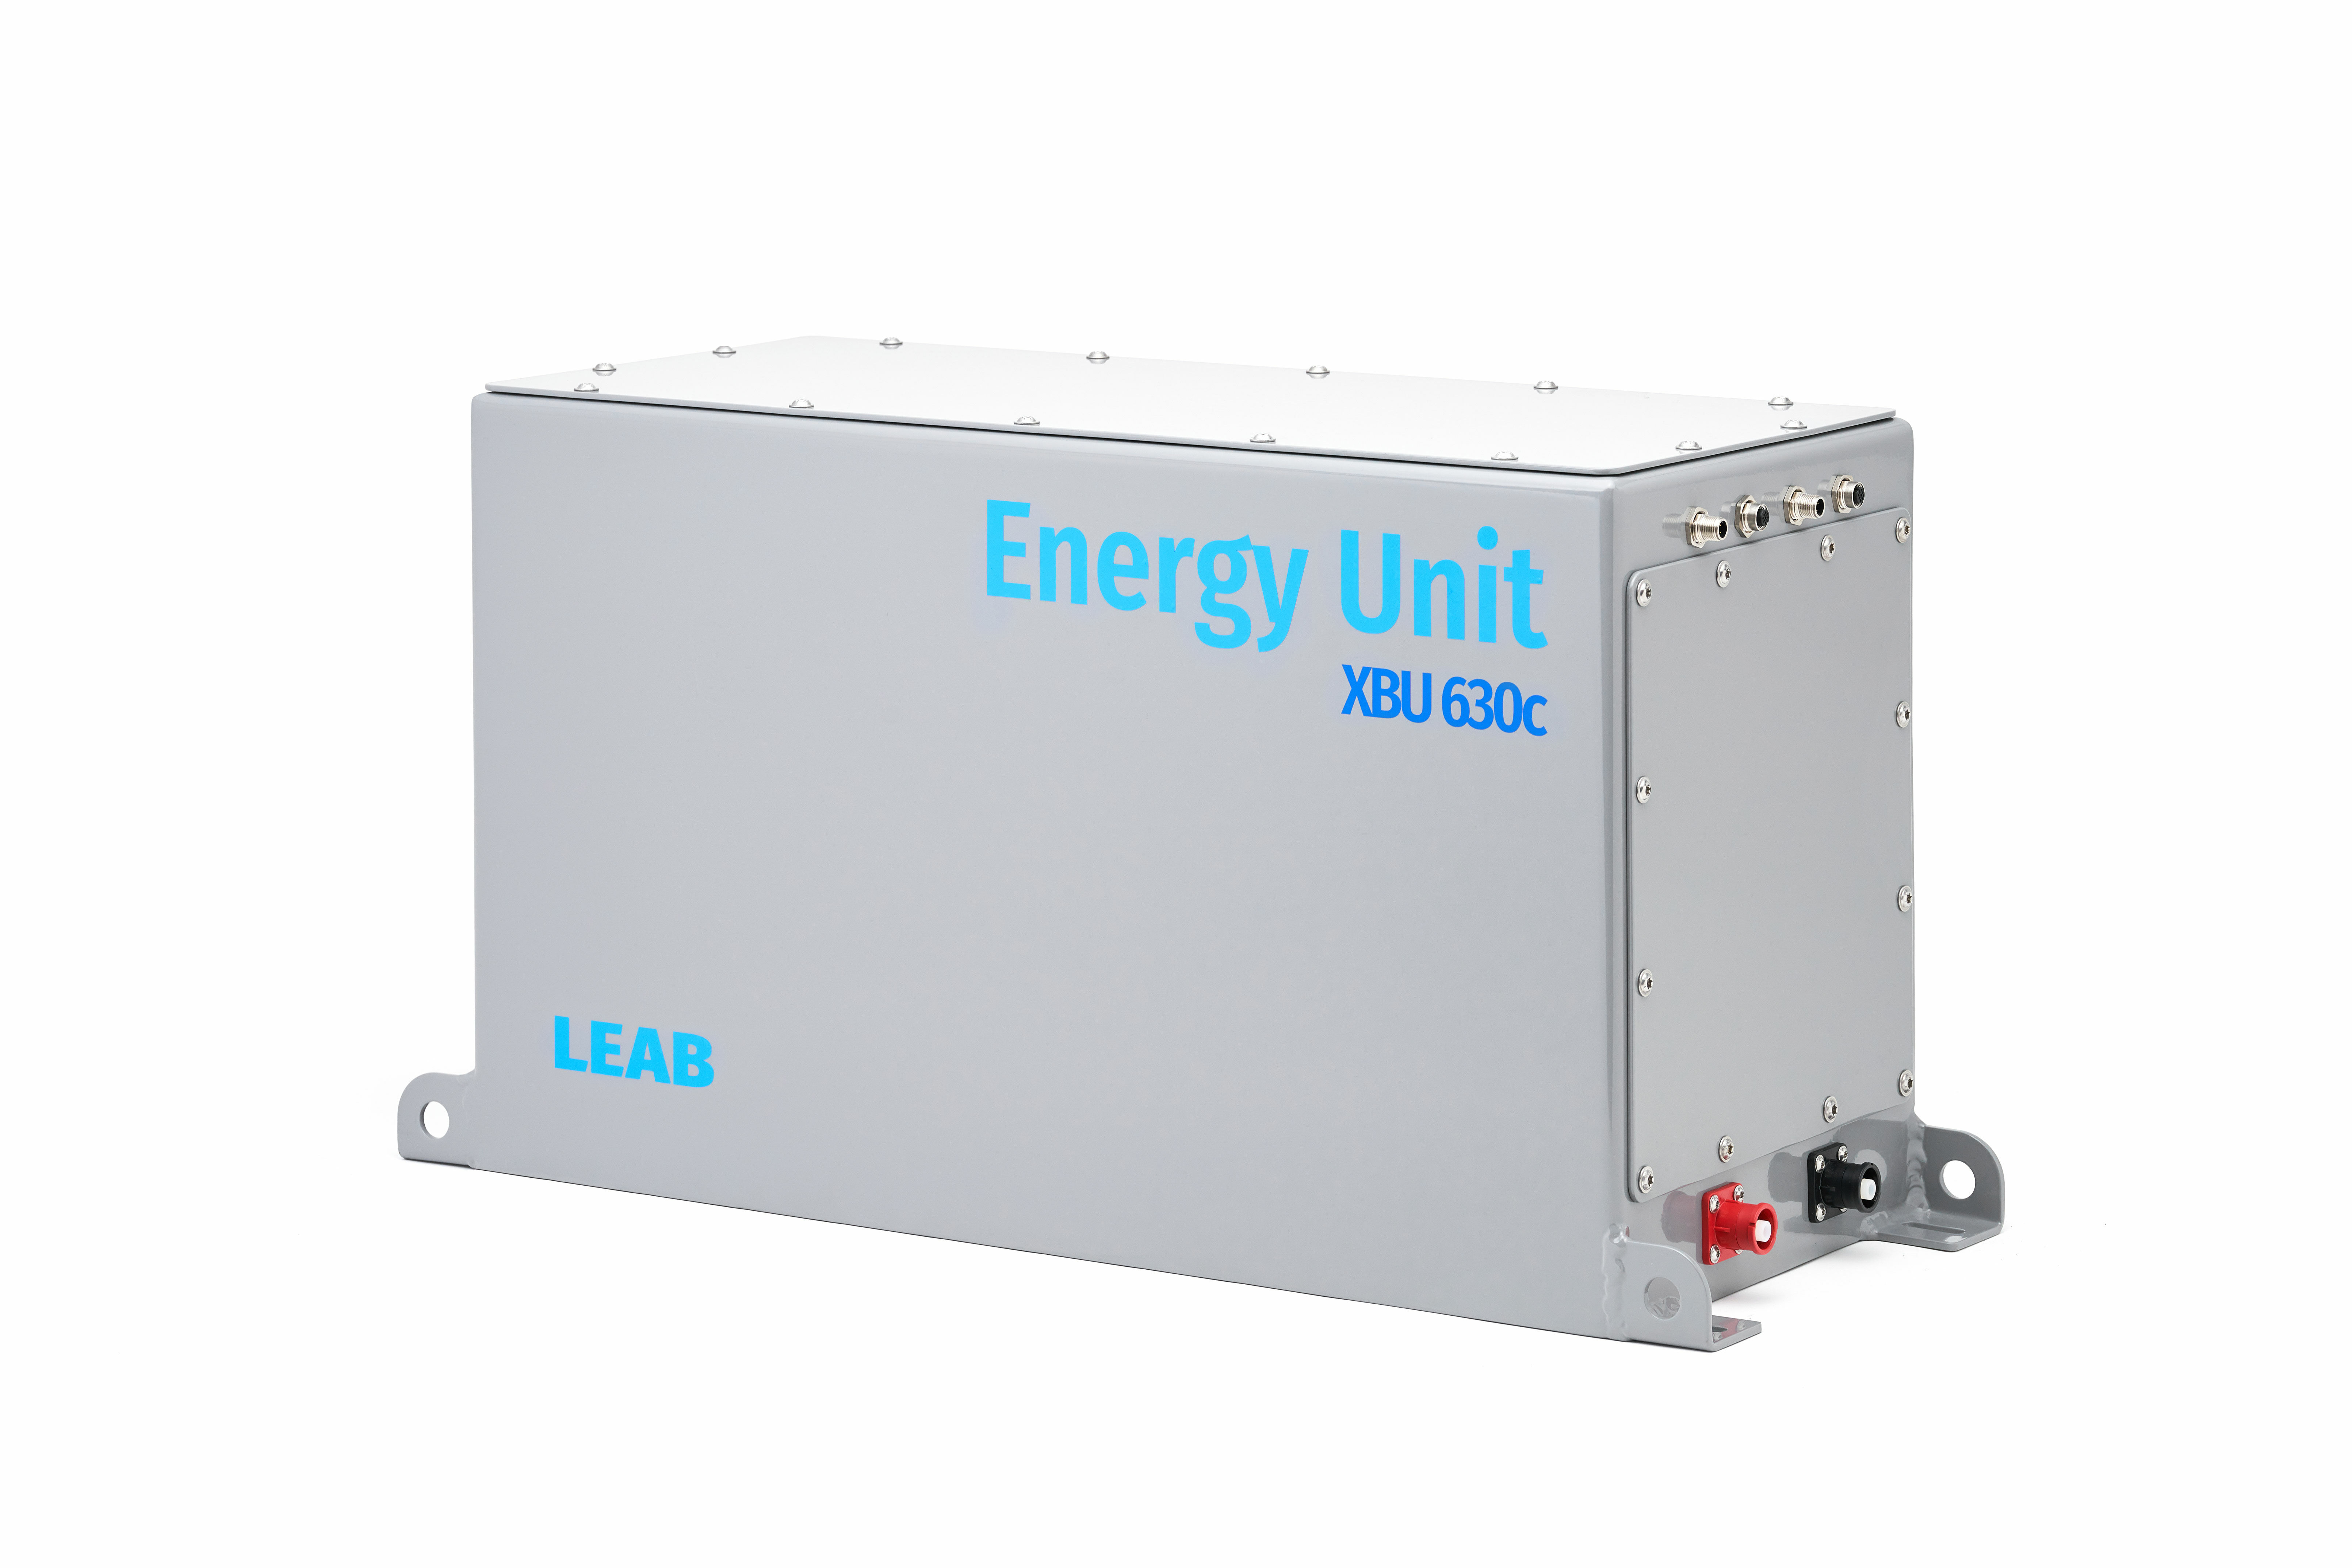 Self-sufficient power supply: Energy Unit with XBU